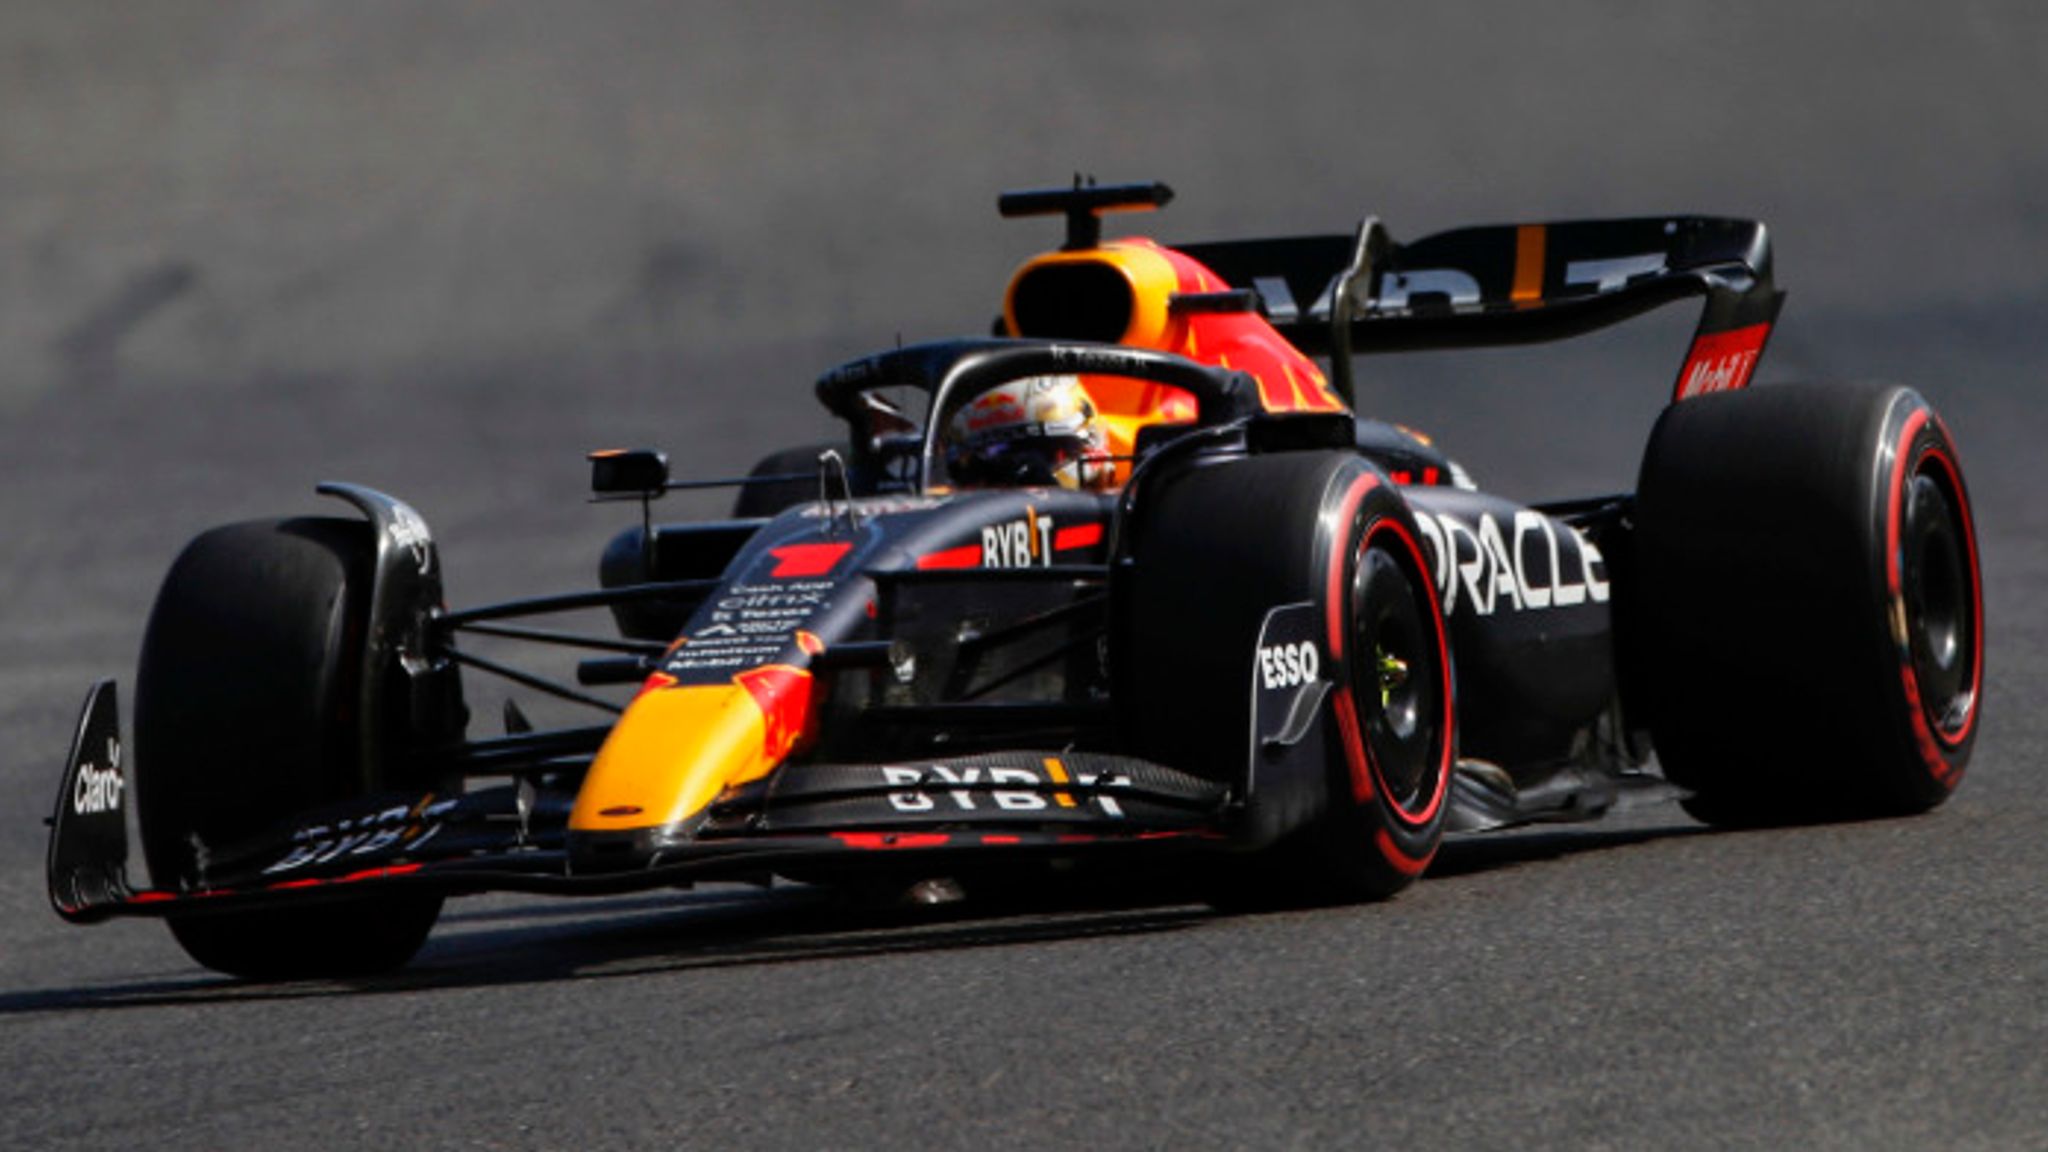 Belgian Grand Prix Live updates from Spa as Max Verstappen seeks to win despite penalty F1 News Sky Sports